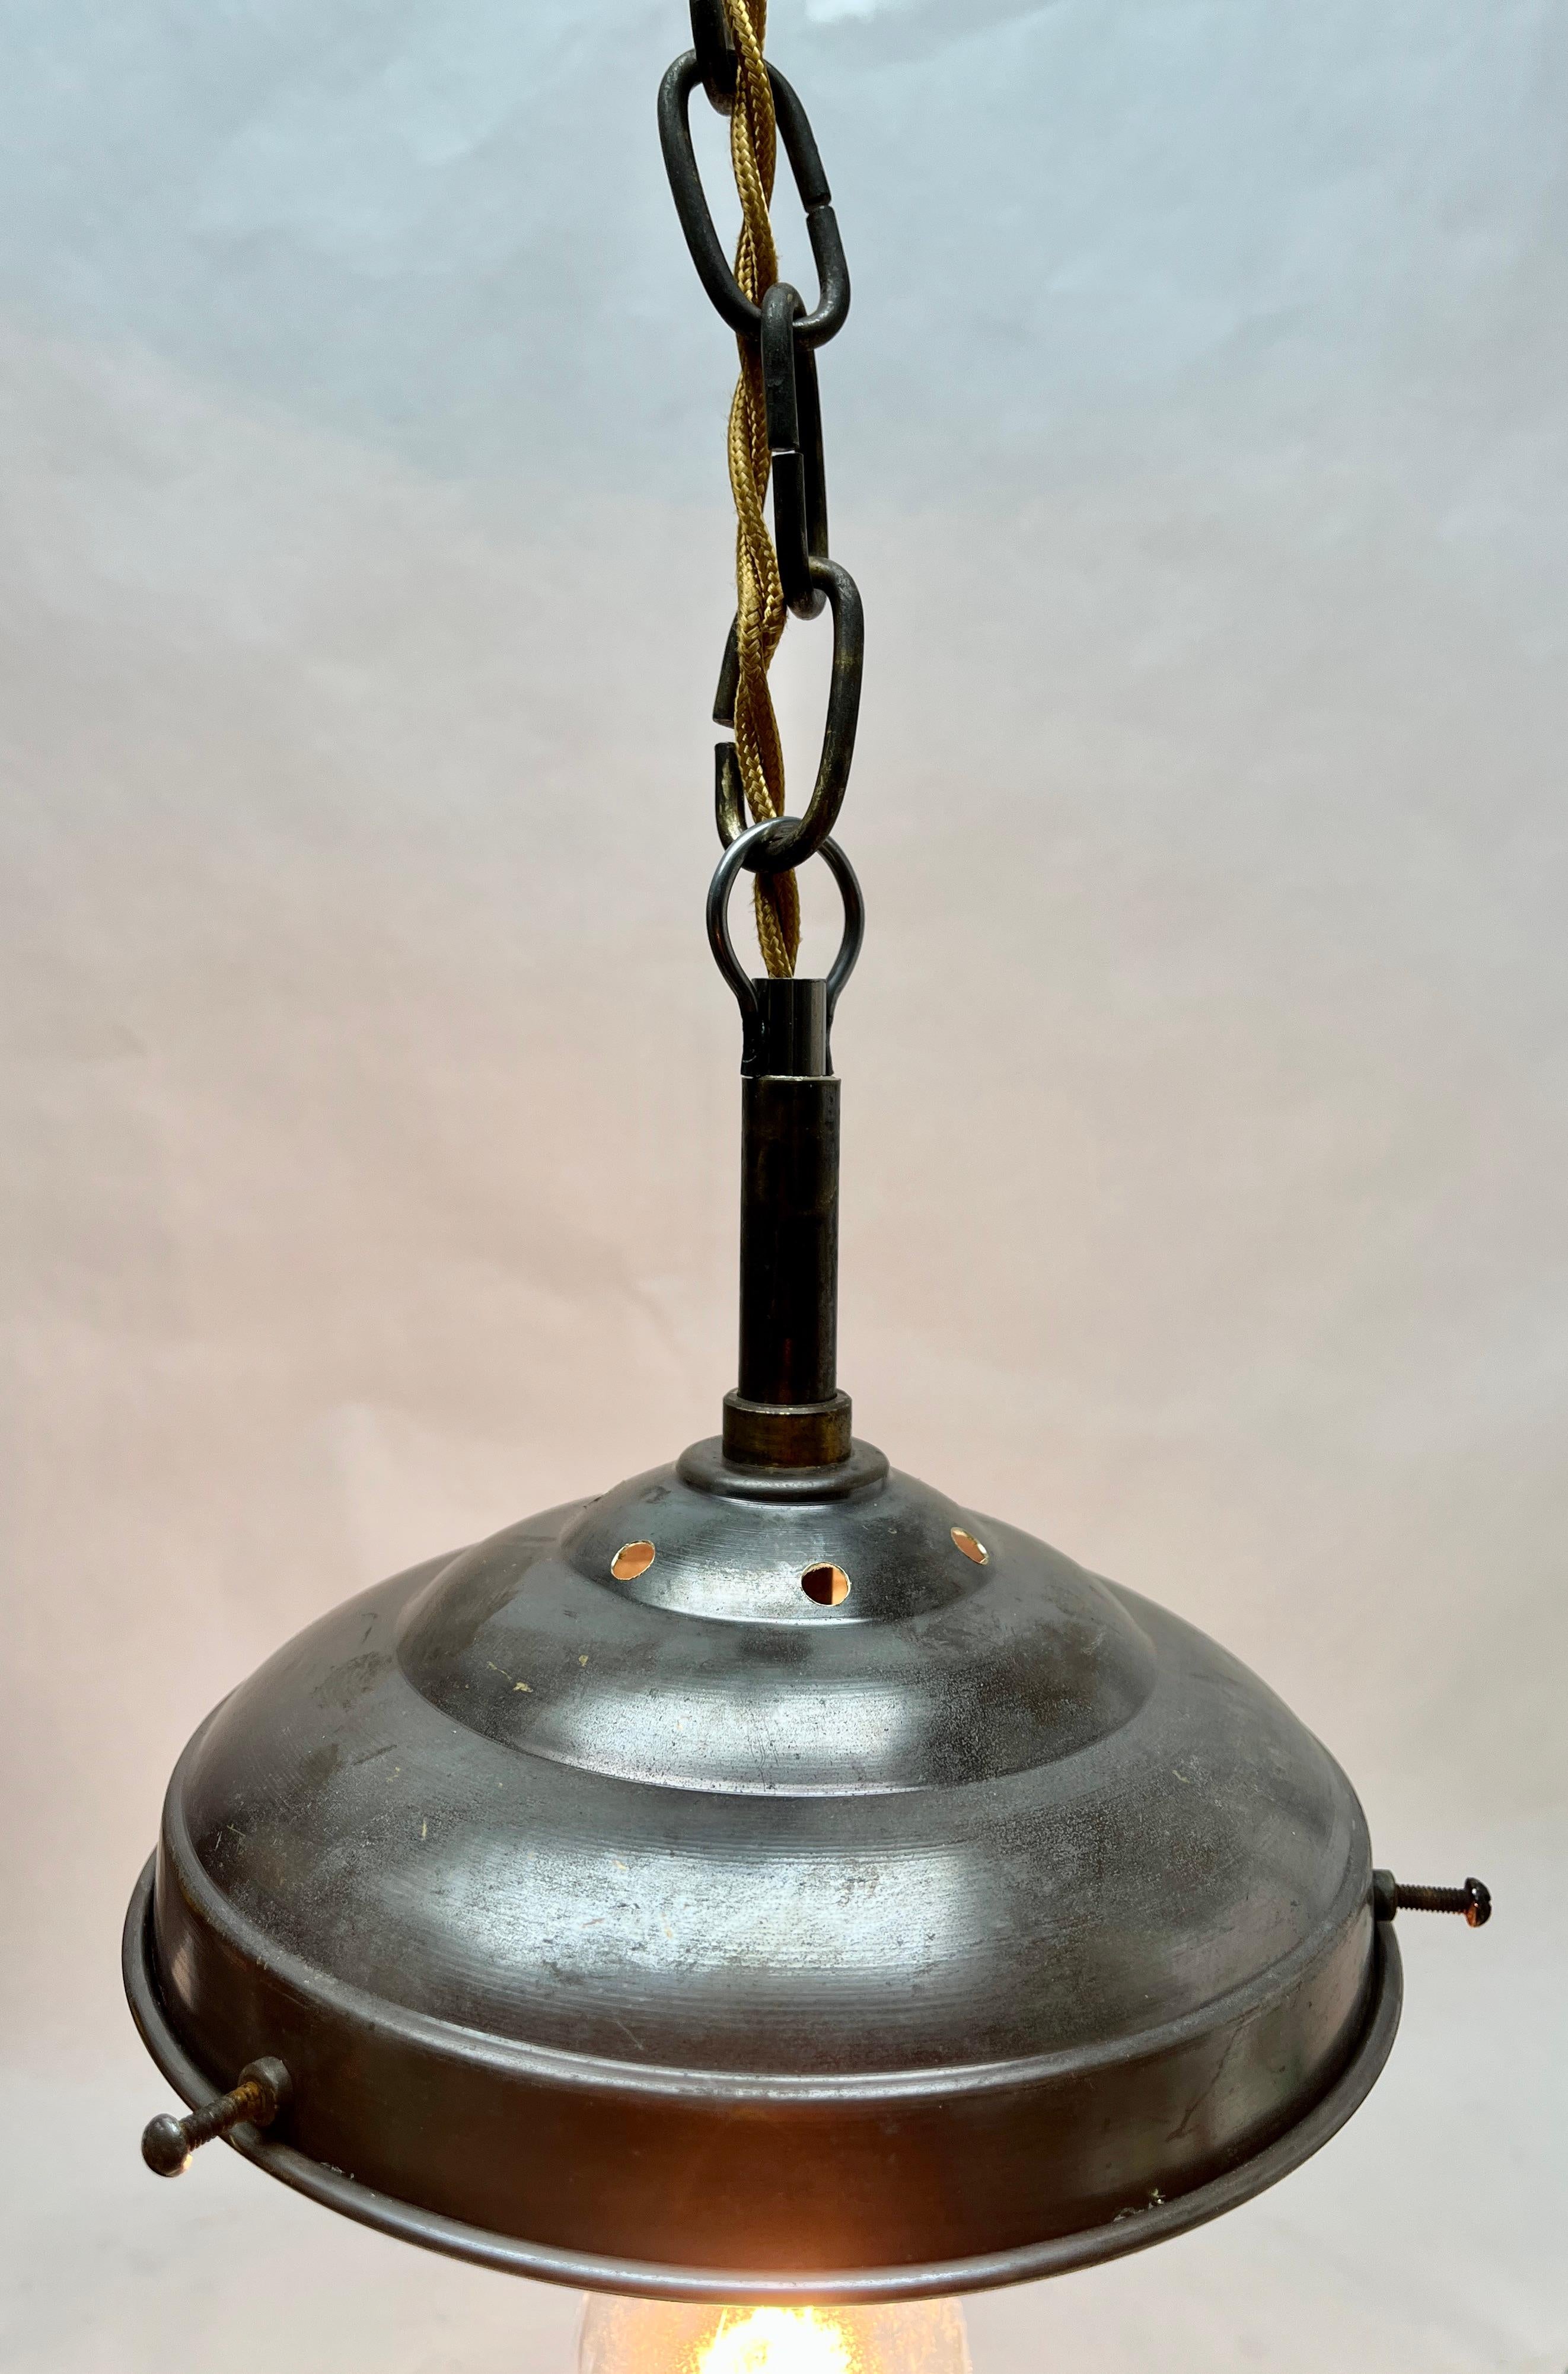 From the range by the Phillips Company, this centre-light is on a central chain. The lamp has a fitting on a Solid Brass plate and holds a globular shade of opaline glass.

In good condition and in full working order with standard New lamp